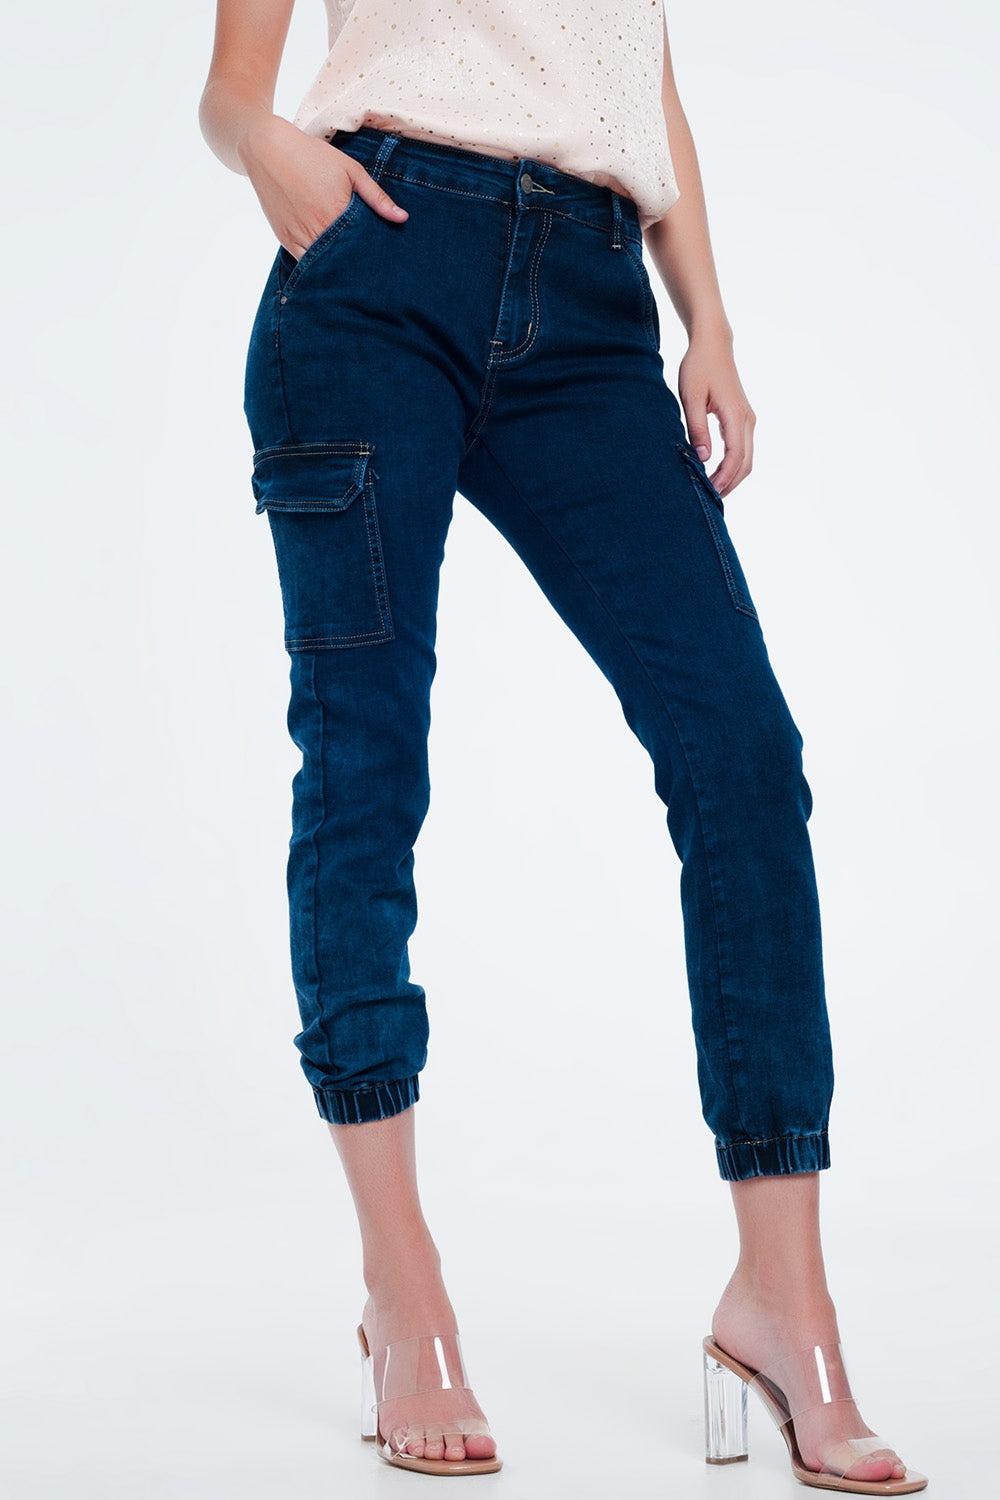 Jeans in navy with cargo pockets